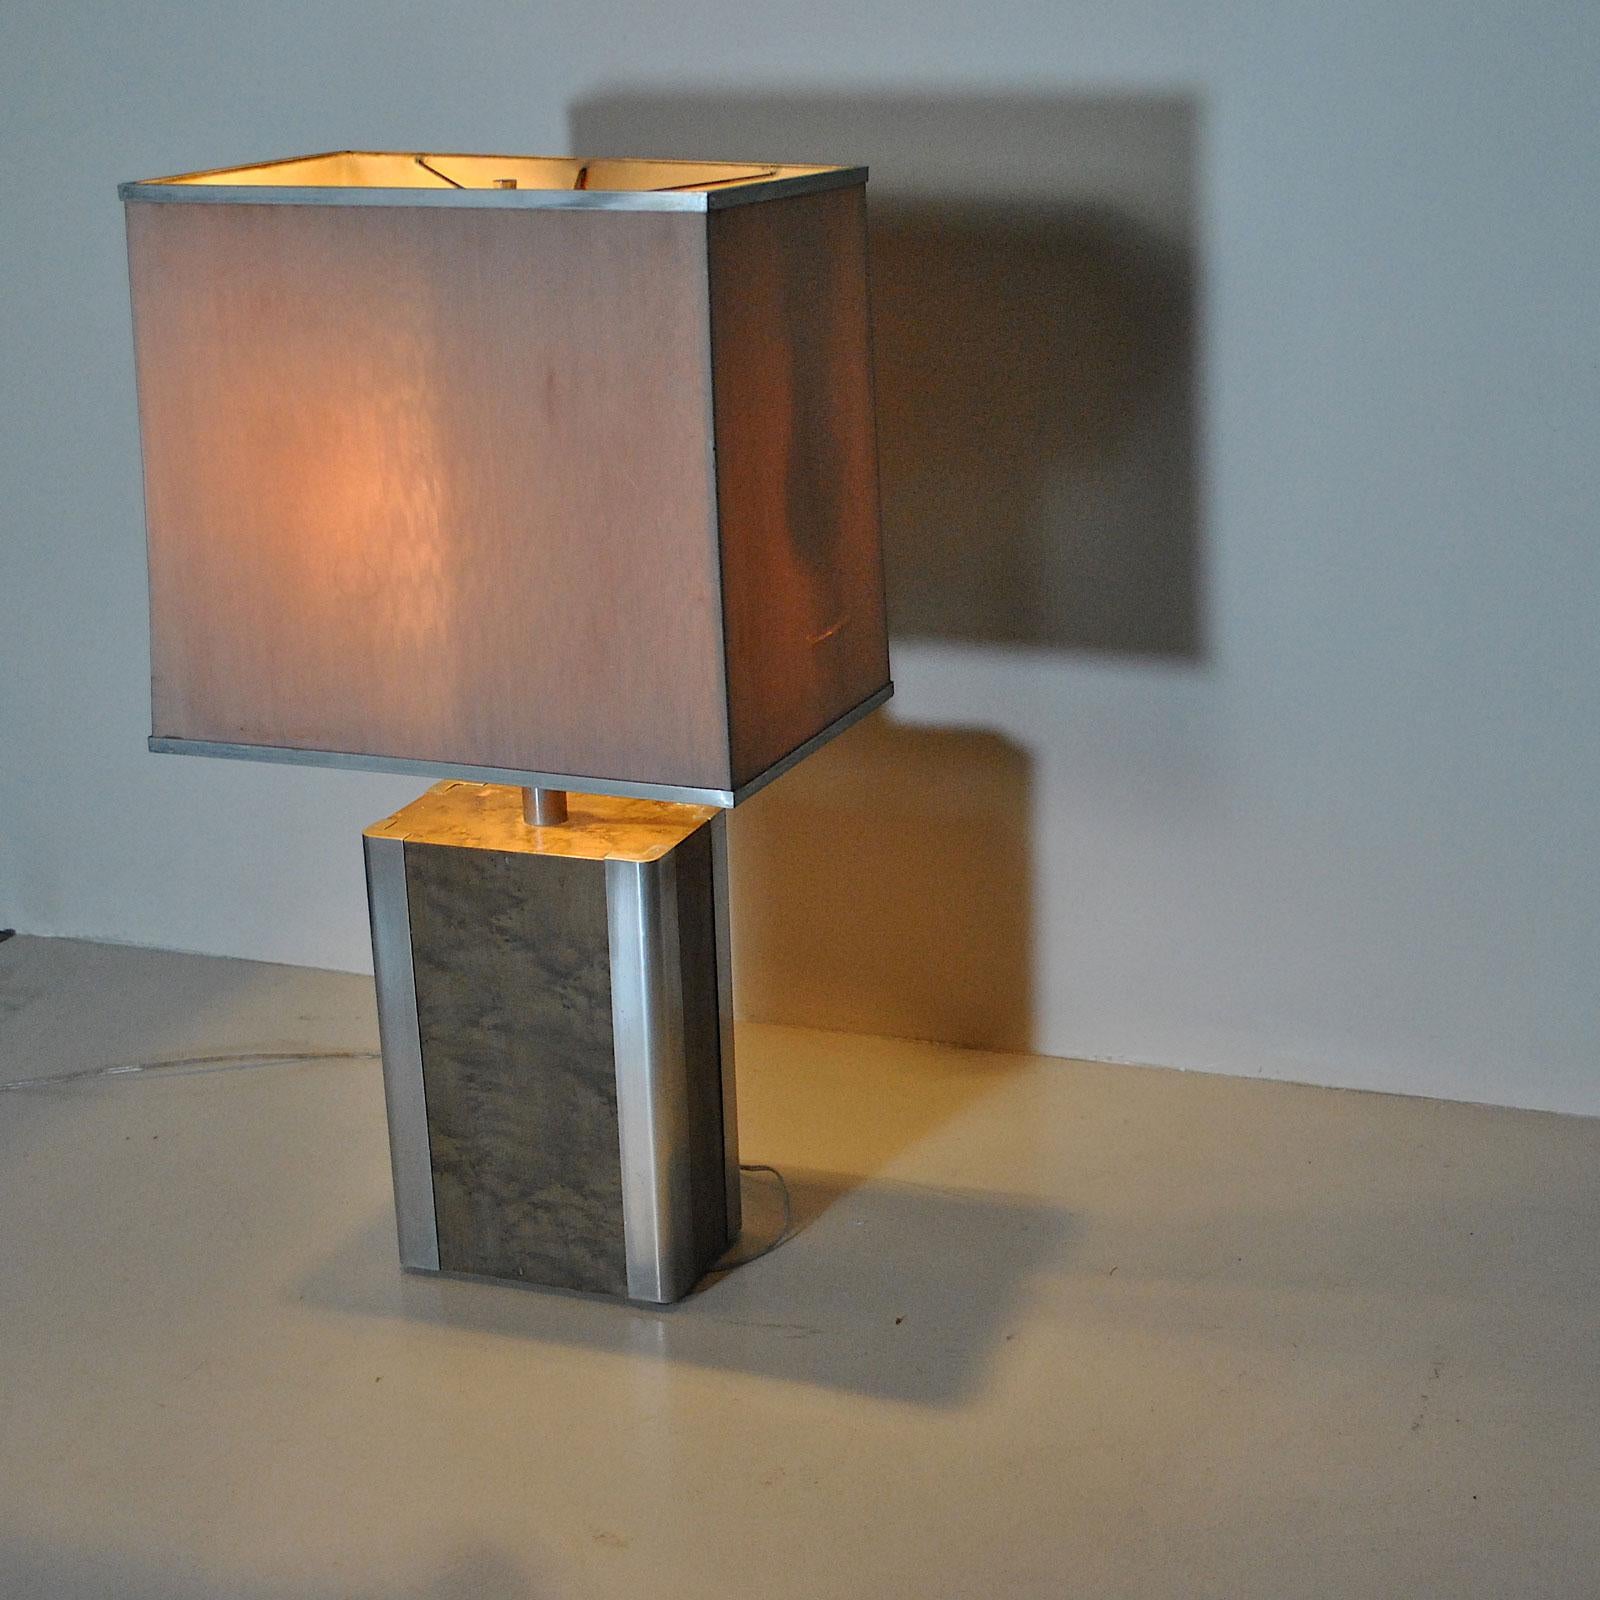 Italian Midcentury Table Lamp in Drawn Wood and Steel from the 1970s For Sale 7